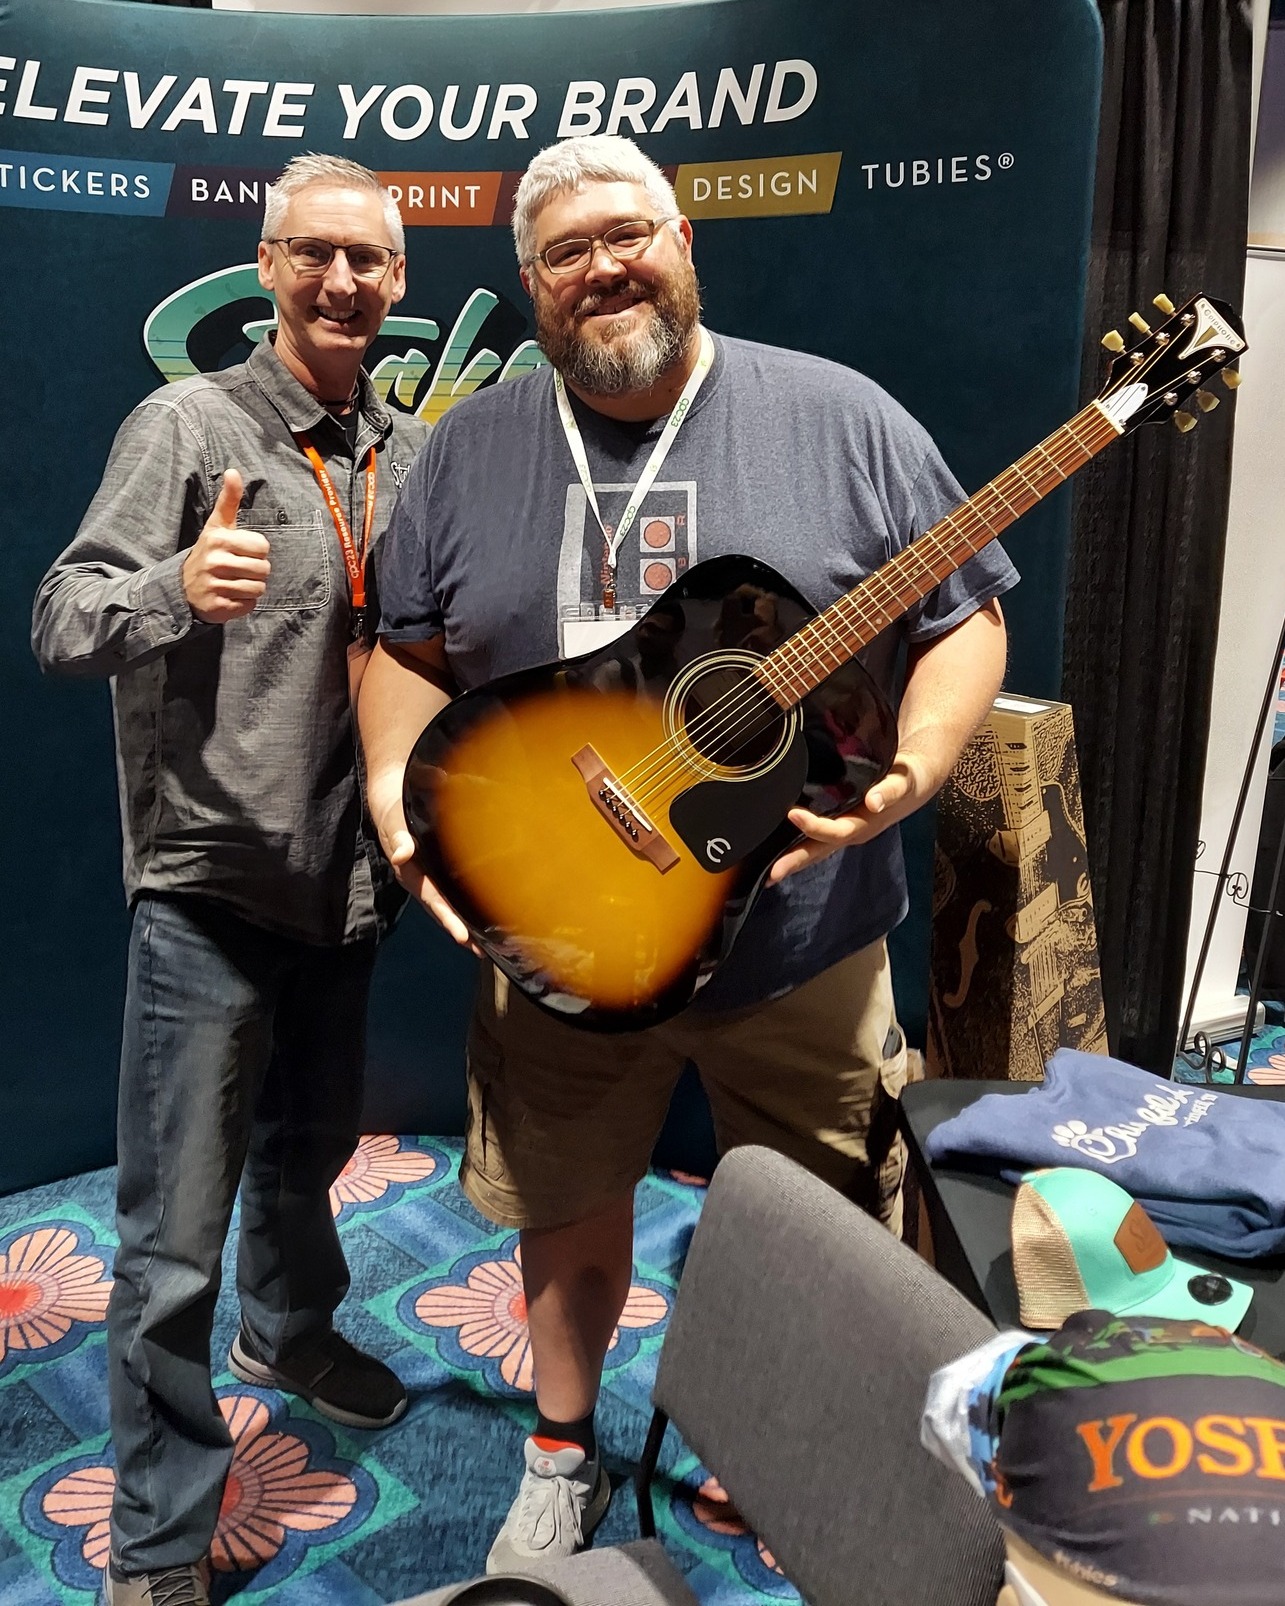 Congrats to Aaron from Thrive Church - Morganton on winning the guitar at the 2023 Children's Pastors' Conference. We enjoy seeing happy faces at or booth. Let us help you elevate your ministries brand and reach more kids. Check out our website to see how.
https://stickersandmore.com/
@thrivechurchnc 
#CPC2023 #chidrenspastors #churching #guitar #winnerswin #funlife